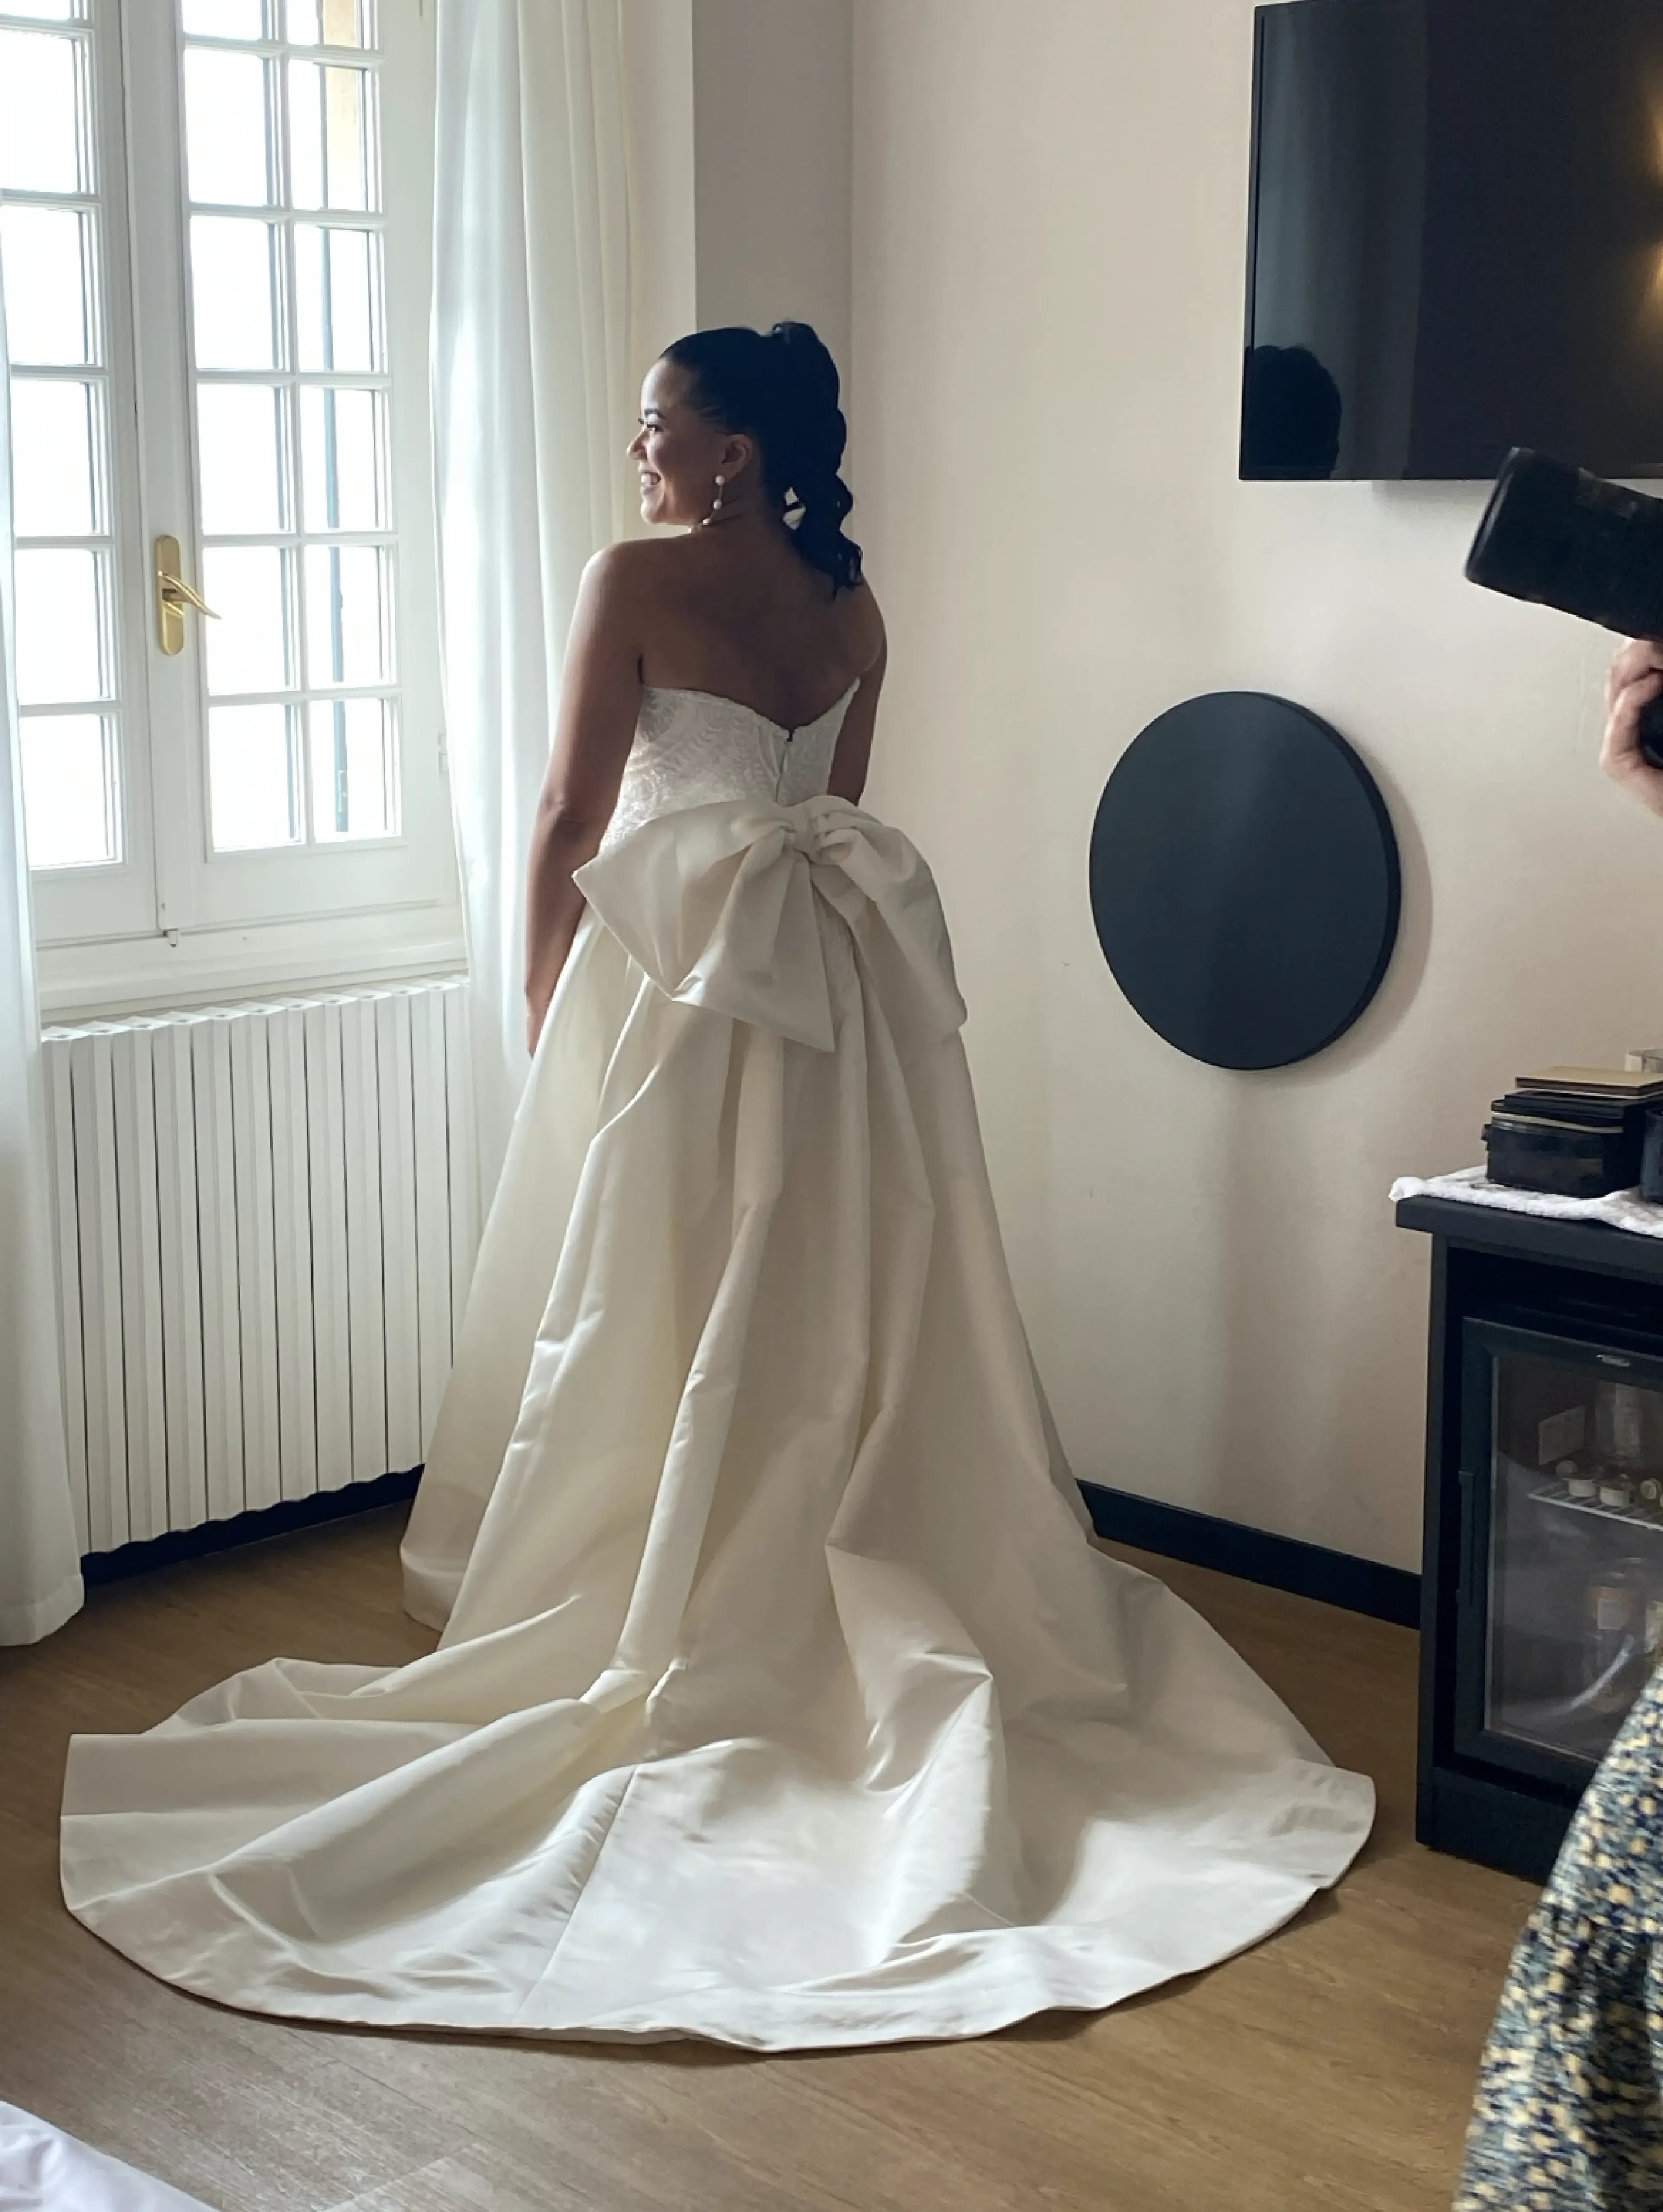 Bride with her back turned, wearing a wedding dress featuring a prominent silk bow at the center of her back. The fabric gracefully flows around the bow.